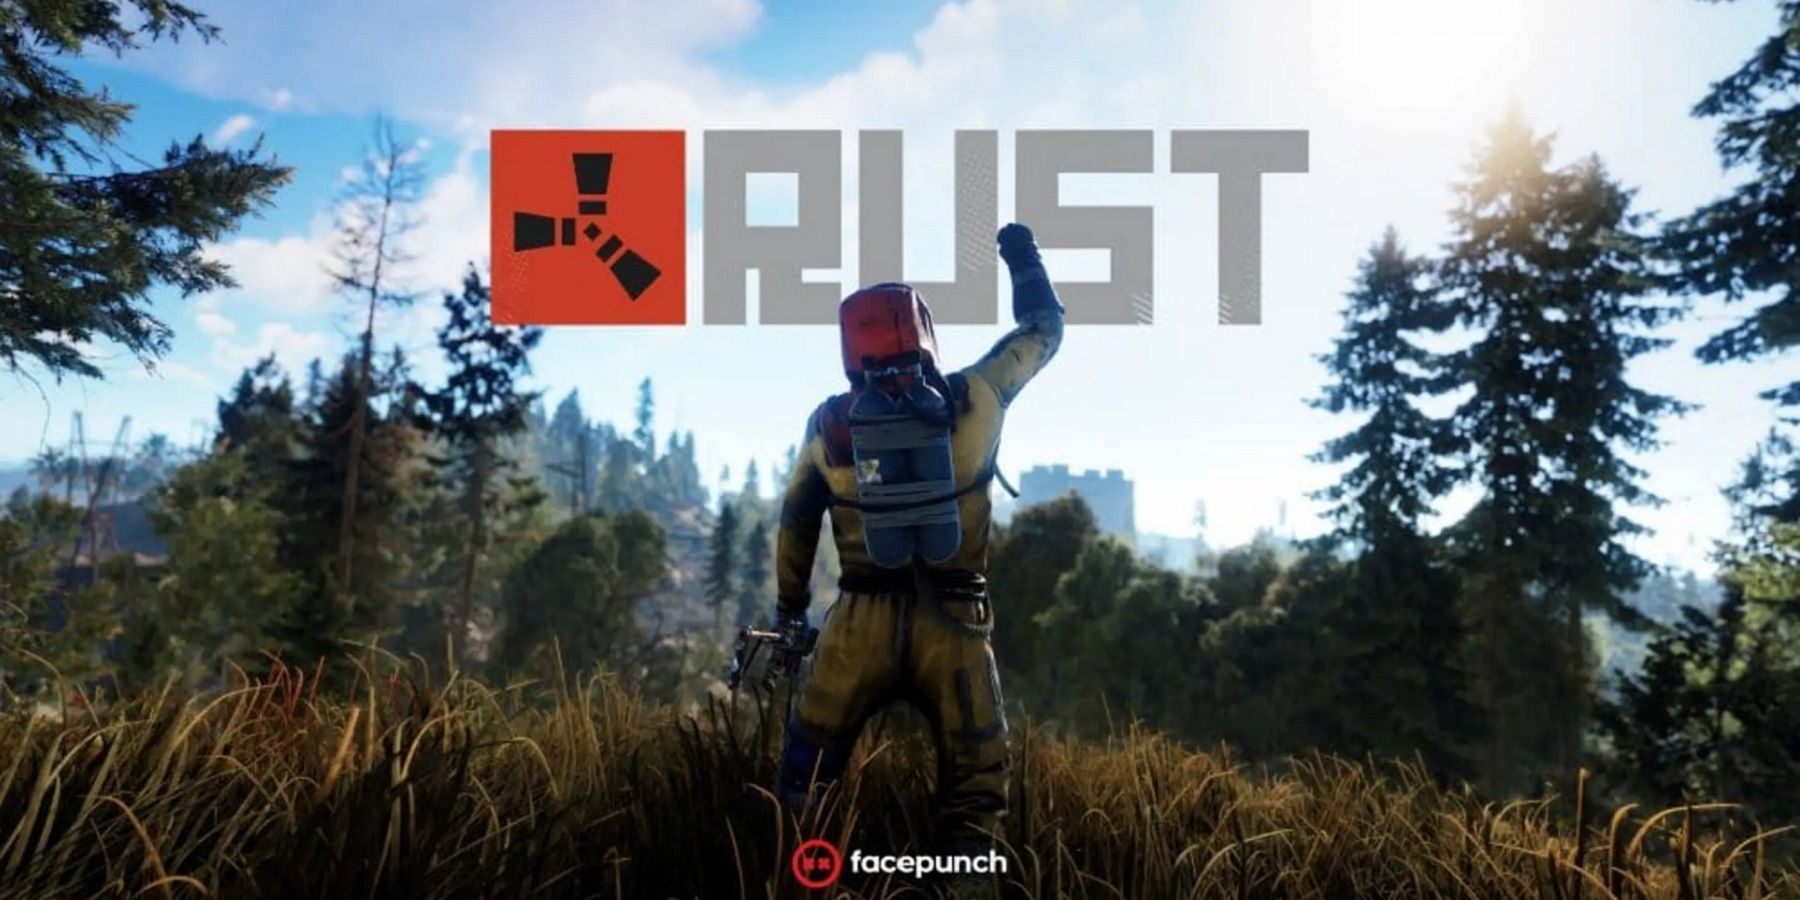 An image from Rust showing a player in a radiation suit who's air punching in a field.